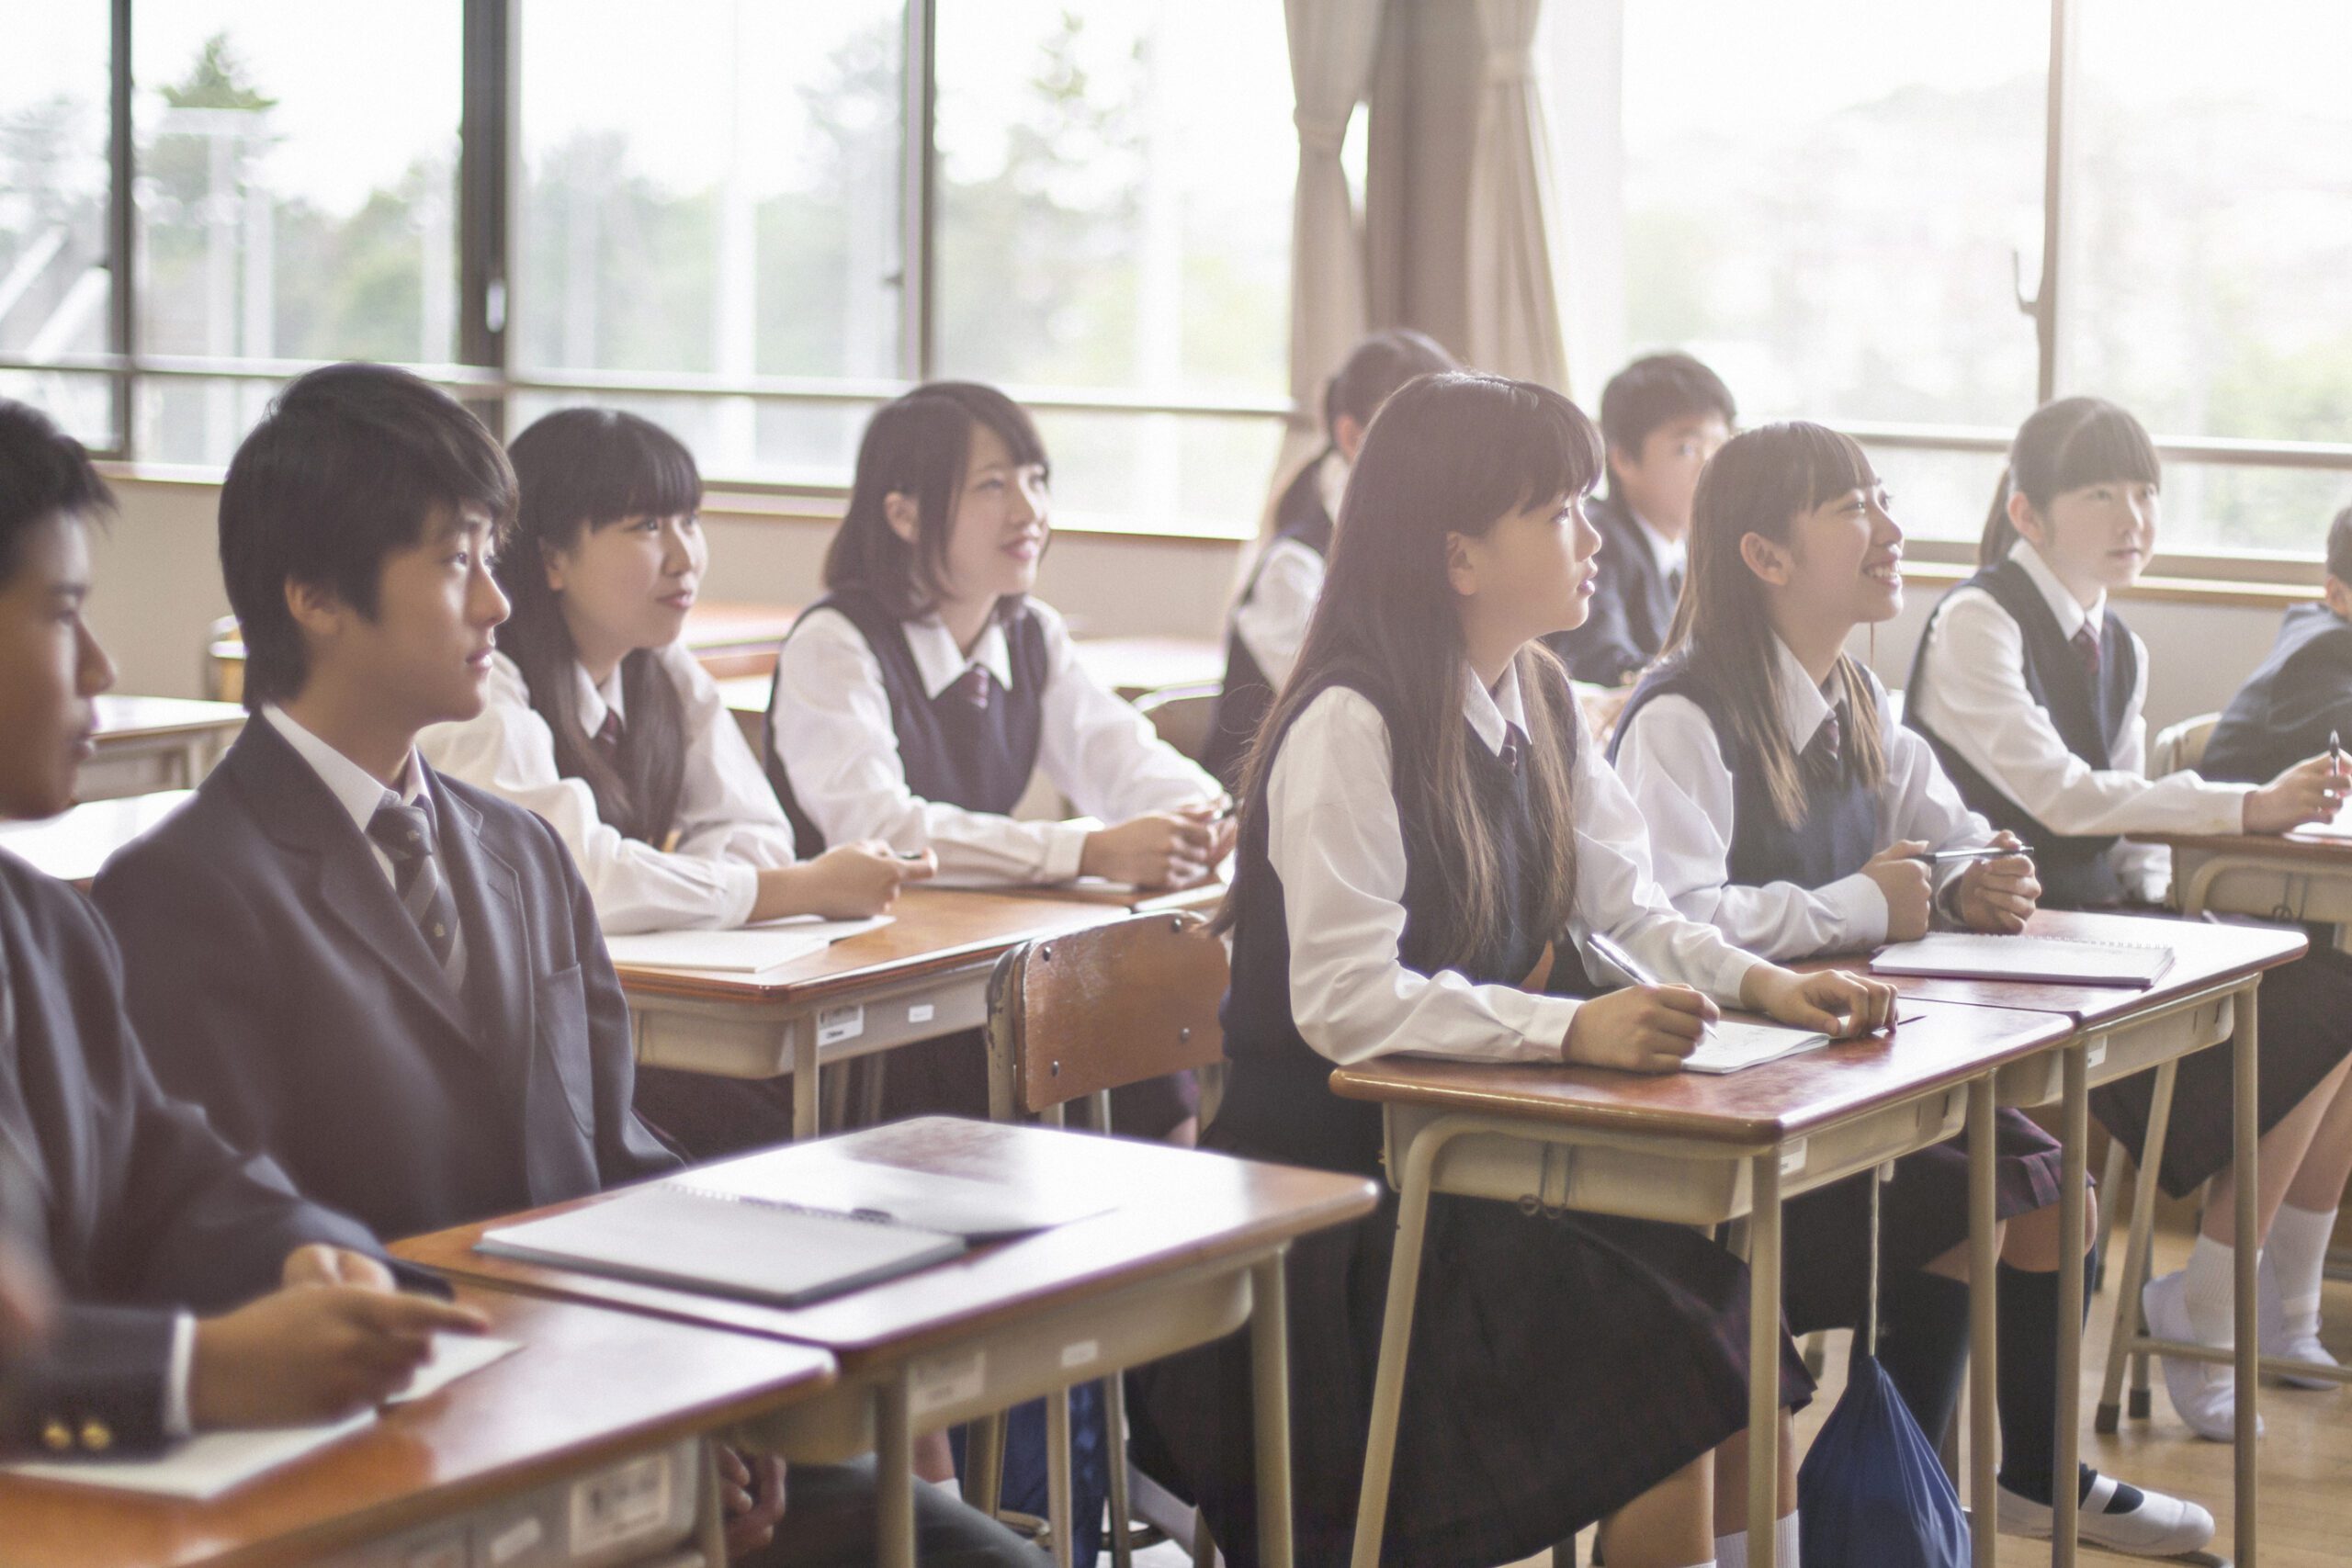 Common Core: A view from Japan